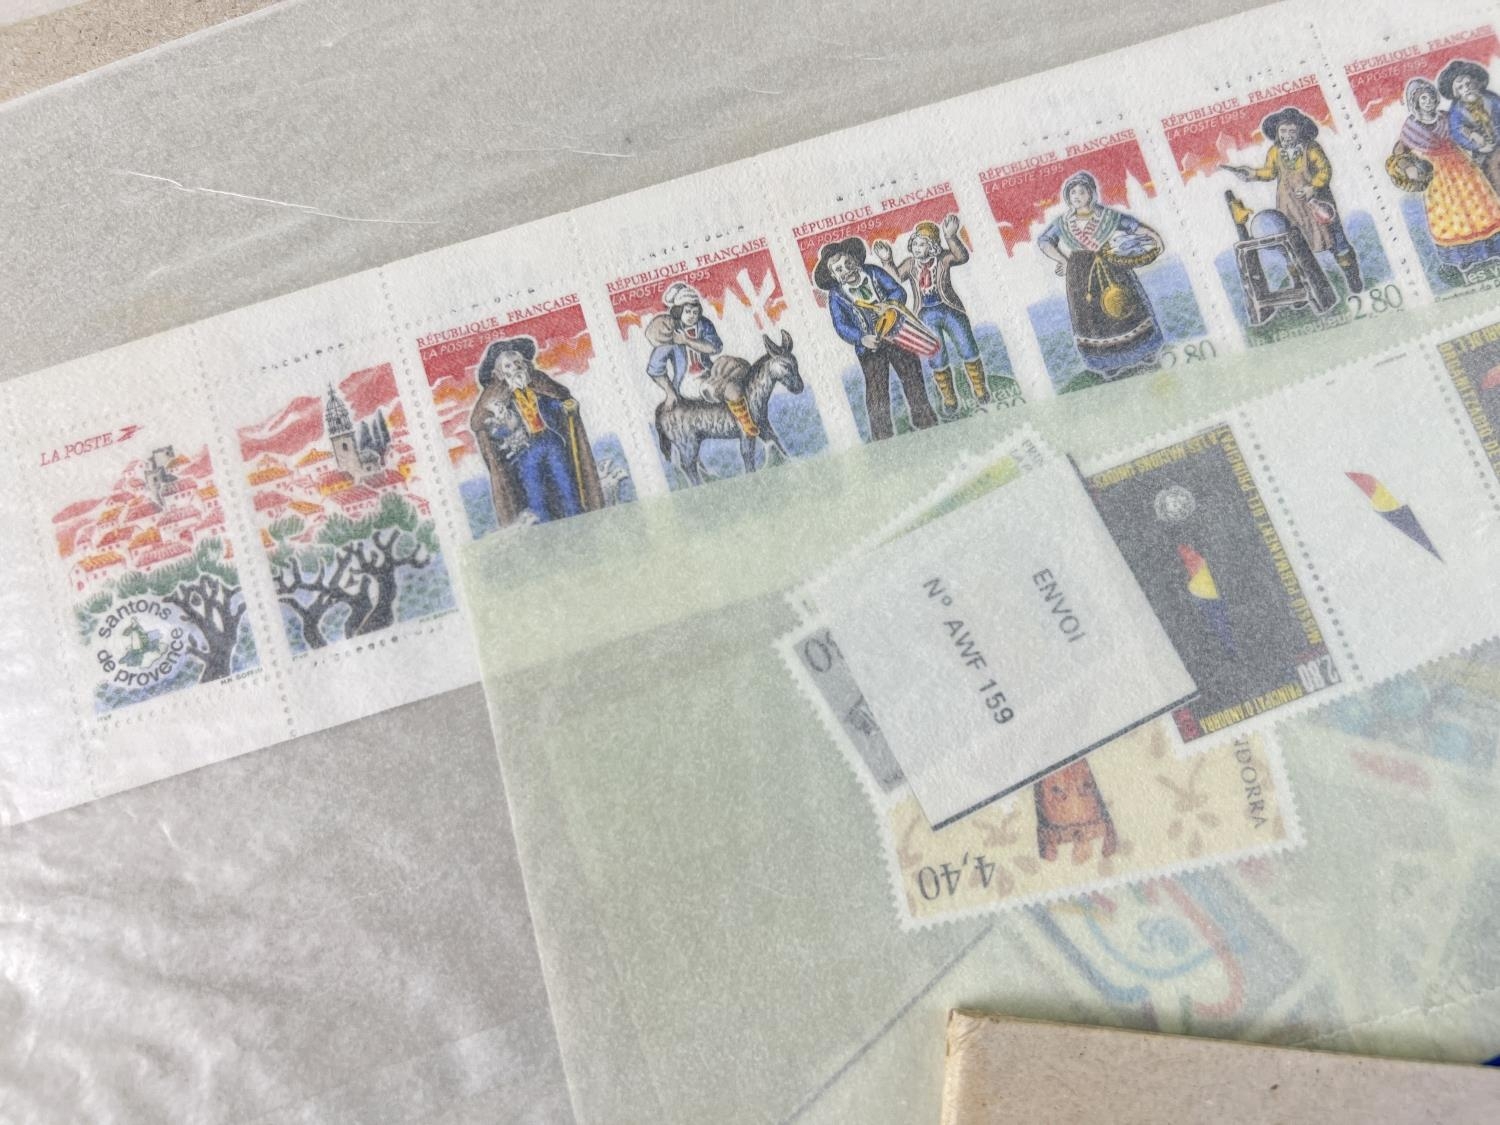 A collection of 1990's La Poste French postage stamps, in mint condition, with original invoices & - Image 4 of 4